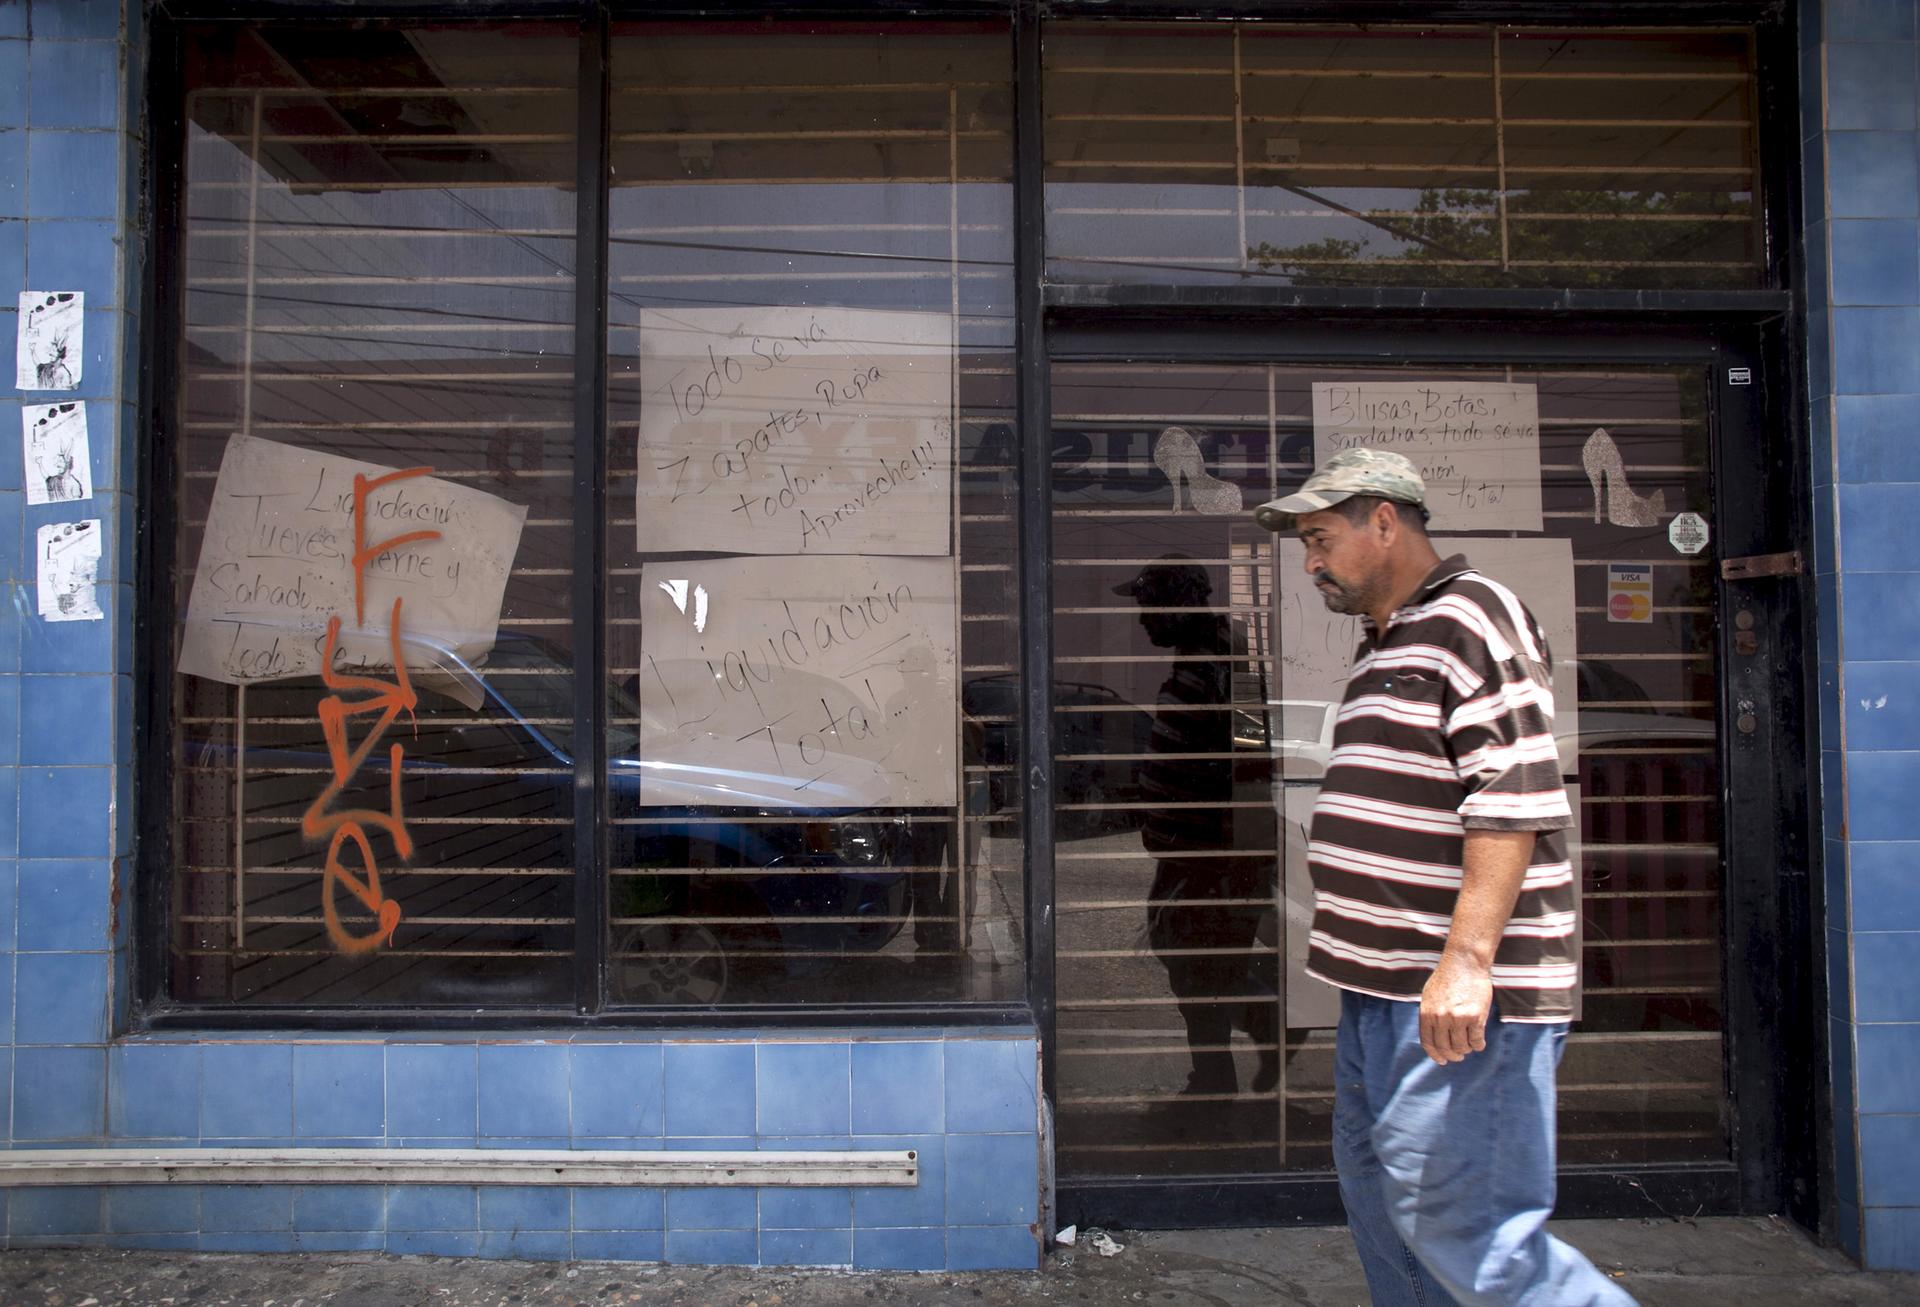 A man walks past a closed store with signs reading "Closing down sale" and "Everything goes, shoes, clothes, take advantage" in Arecibo, Puerto Rico, June 29, 2015.  